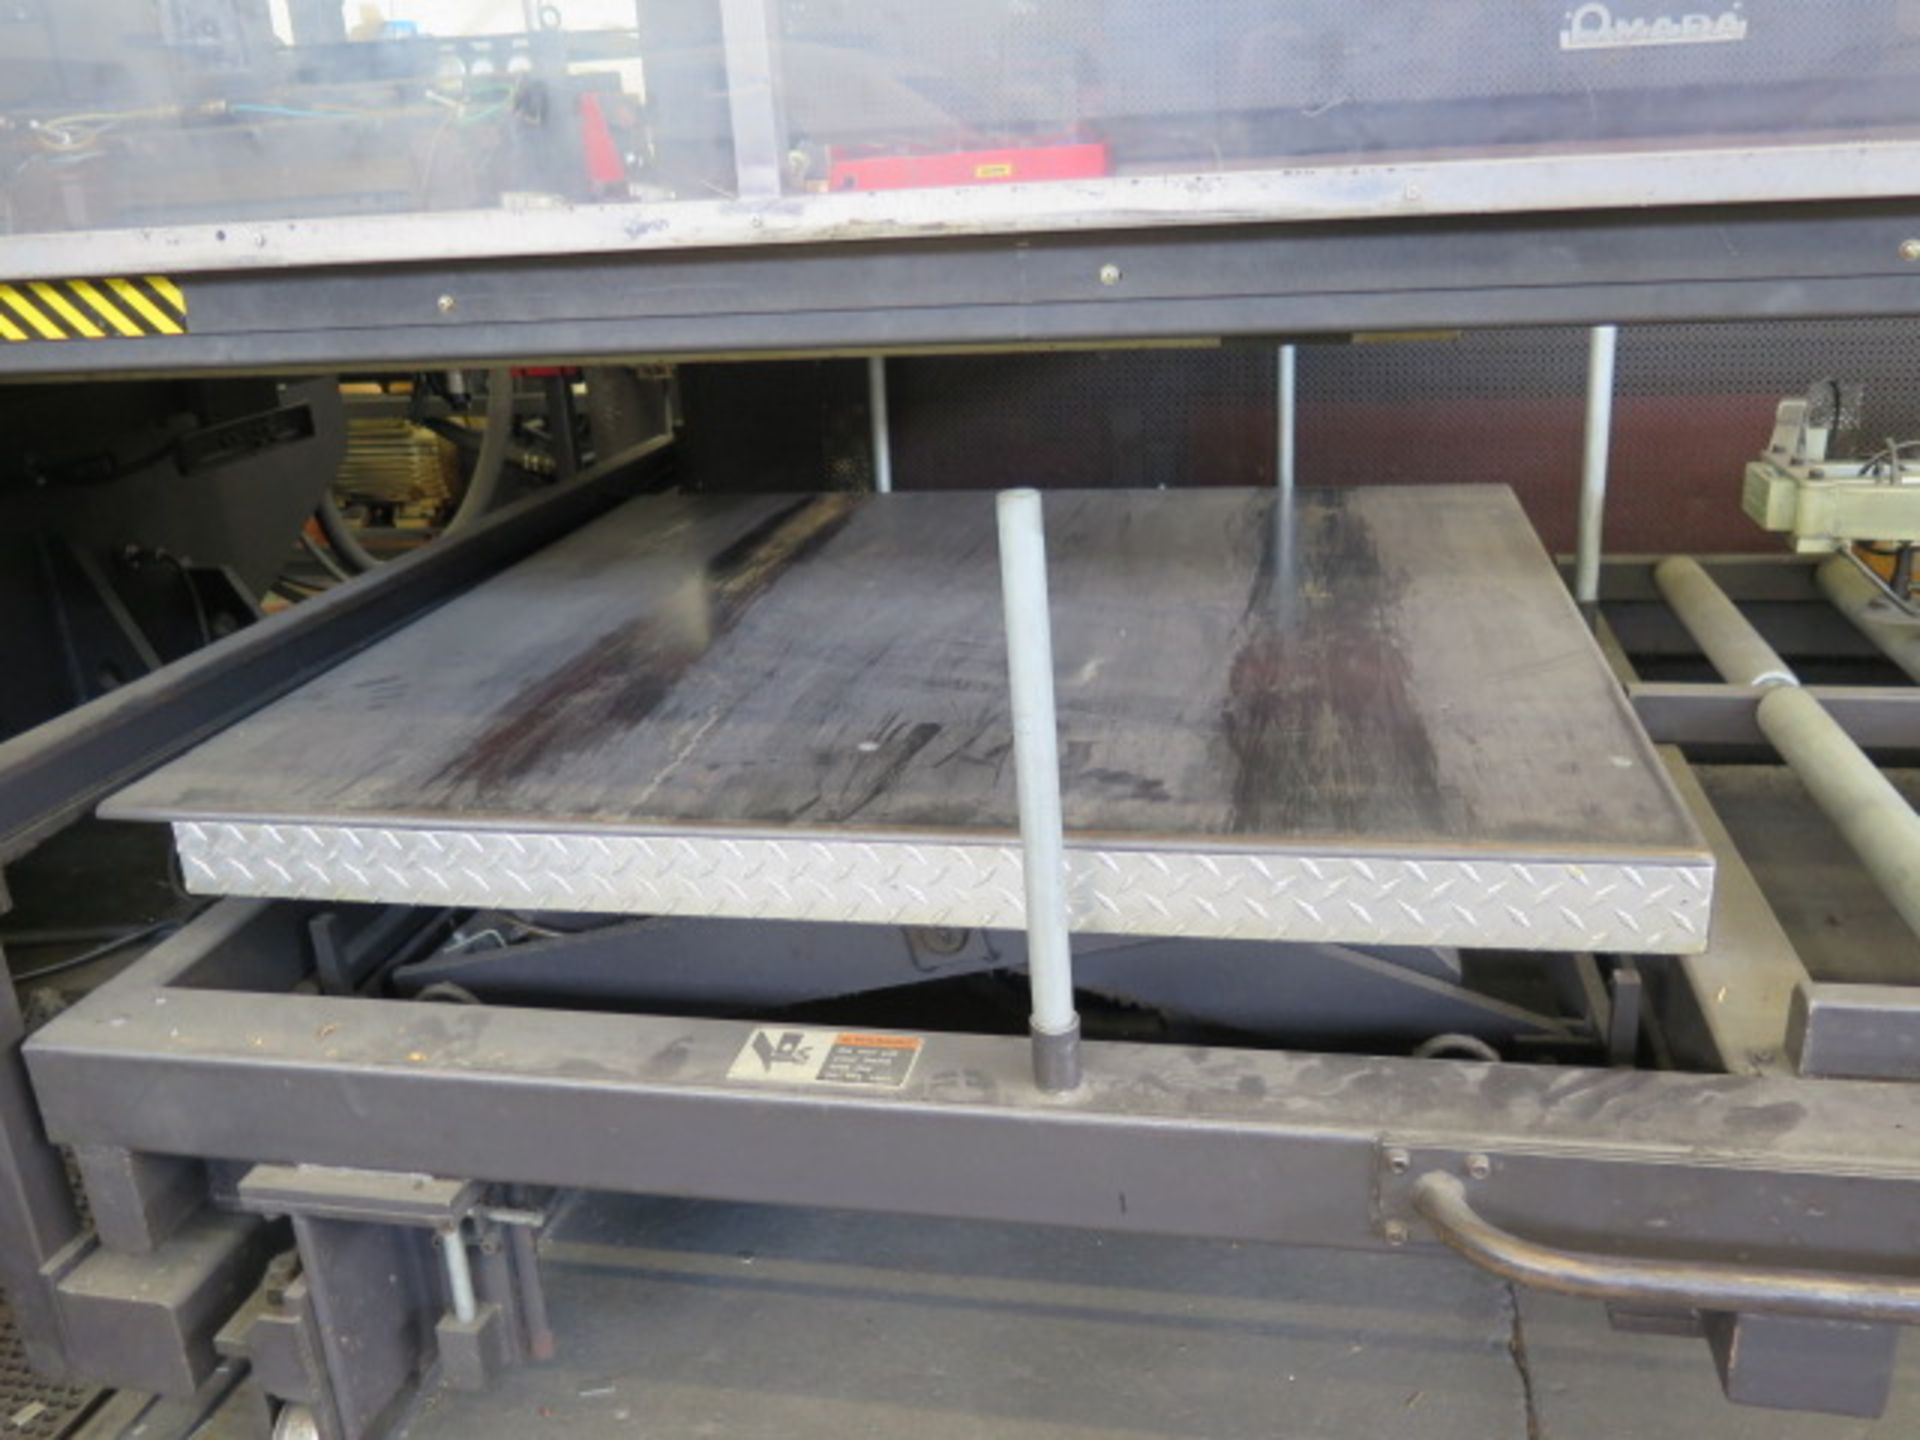 Amada VIPROS 345 30-Ton CNC Turret Punch Cell s/n 34510153 w/ 04P-C Controls, 58-Station, SOLD AS IS - Image 26 of 28